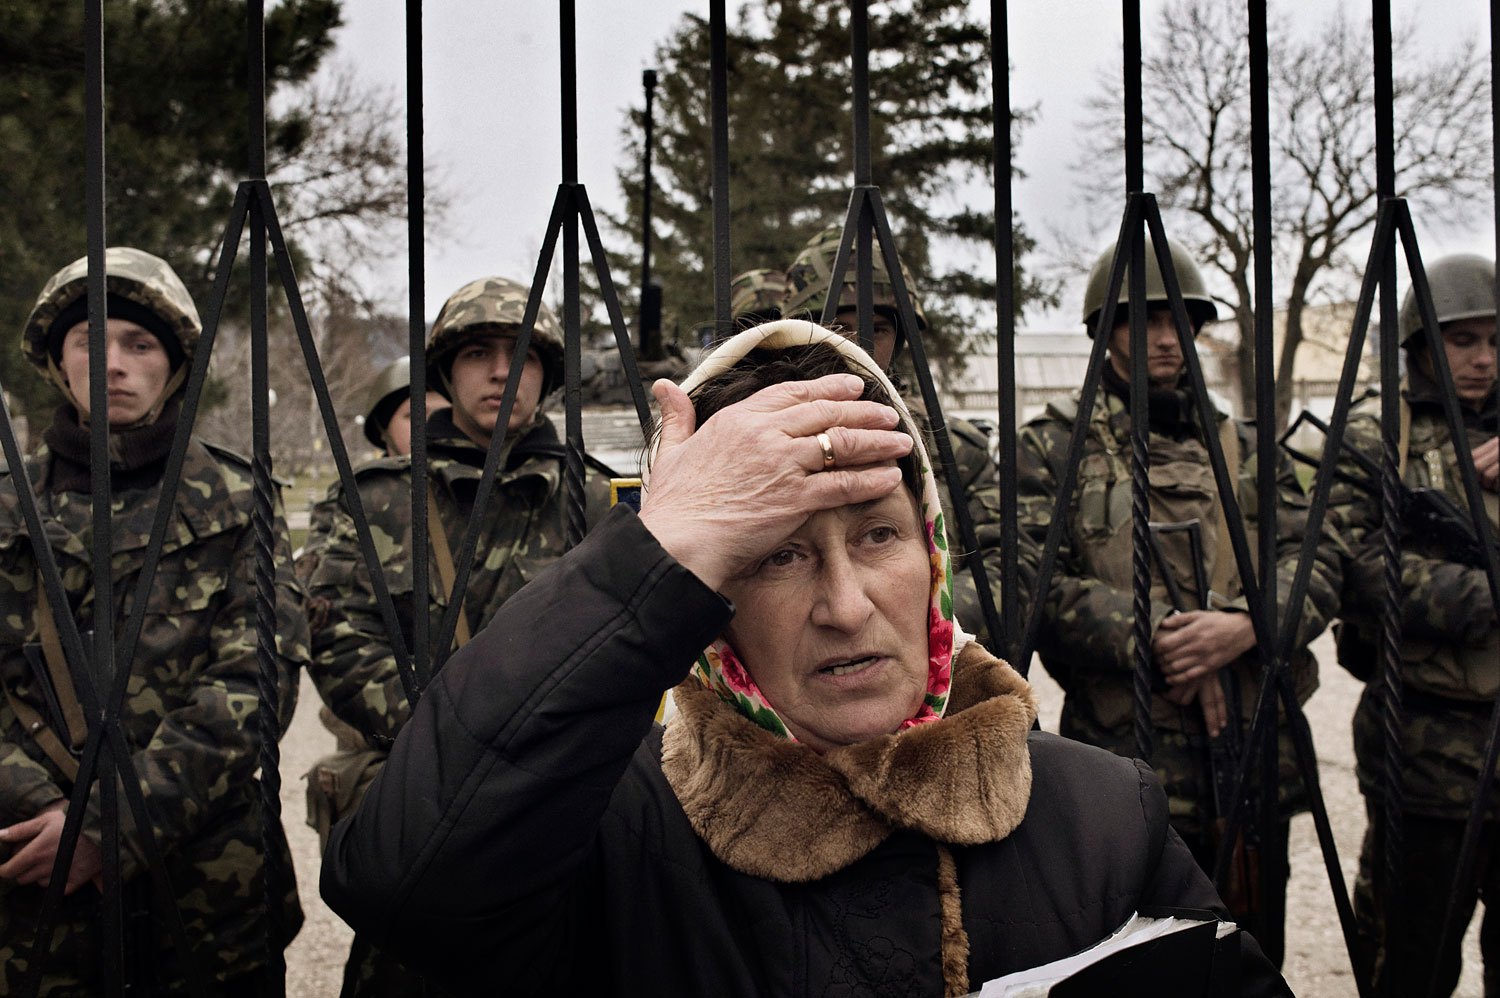 A Ukrainian woman reacts as troops in unmarked uniforms hold positions in Perevalnoye, a small Ukrainian base roughly 15 miles south of Simferopol on Sunday, March 2, 2014. About two dozen Ukrainian soldiers could be seen behind her. (Yuri Kozyrev—NOOR for TIME)